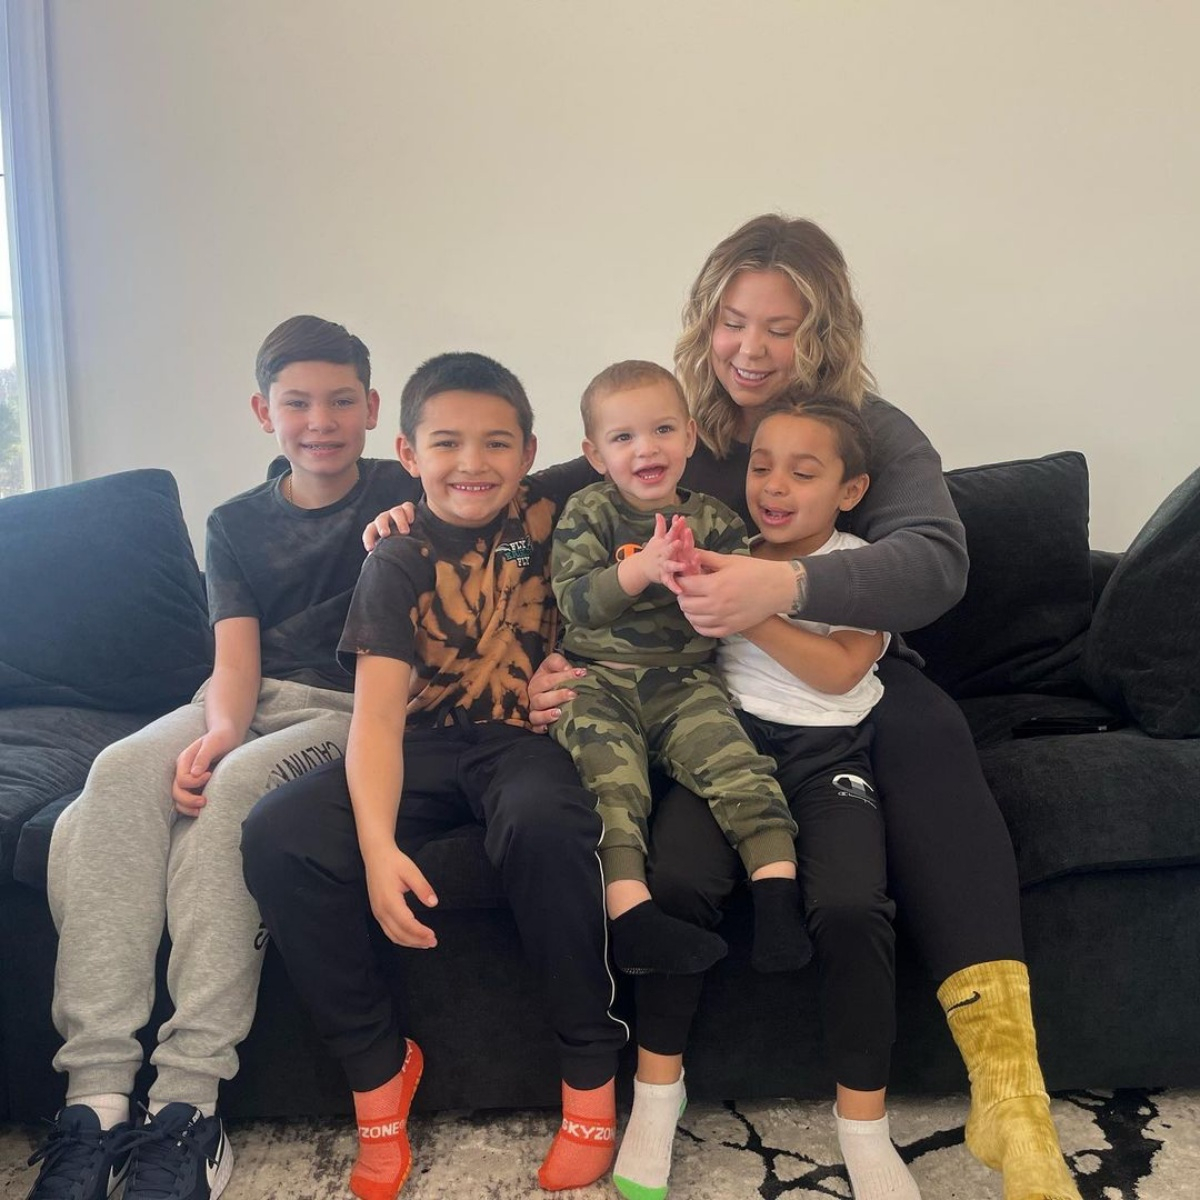 A Guide to Teen Mom Alum Kailyn Lowry's Sprawling Family Tree